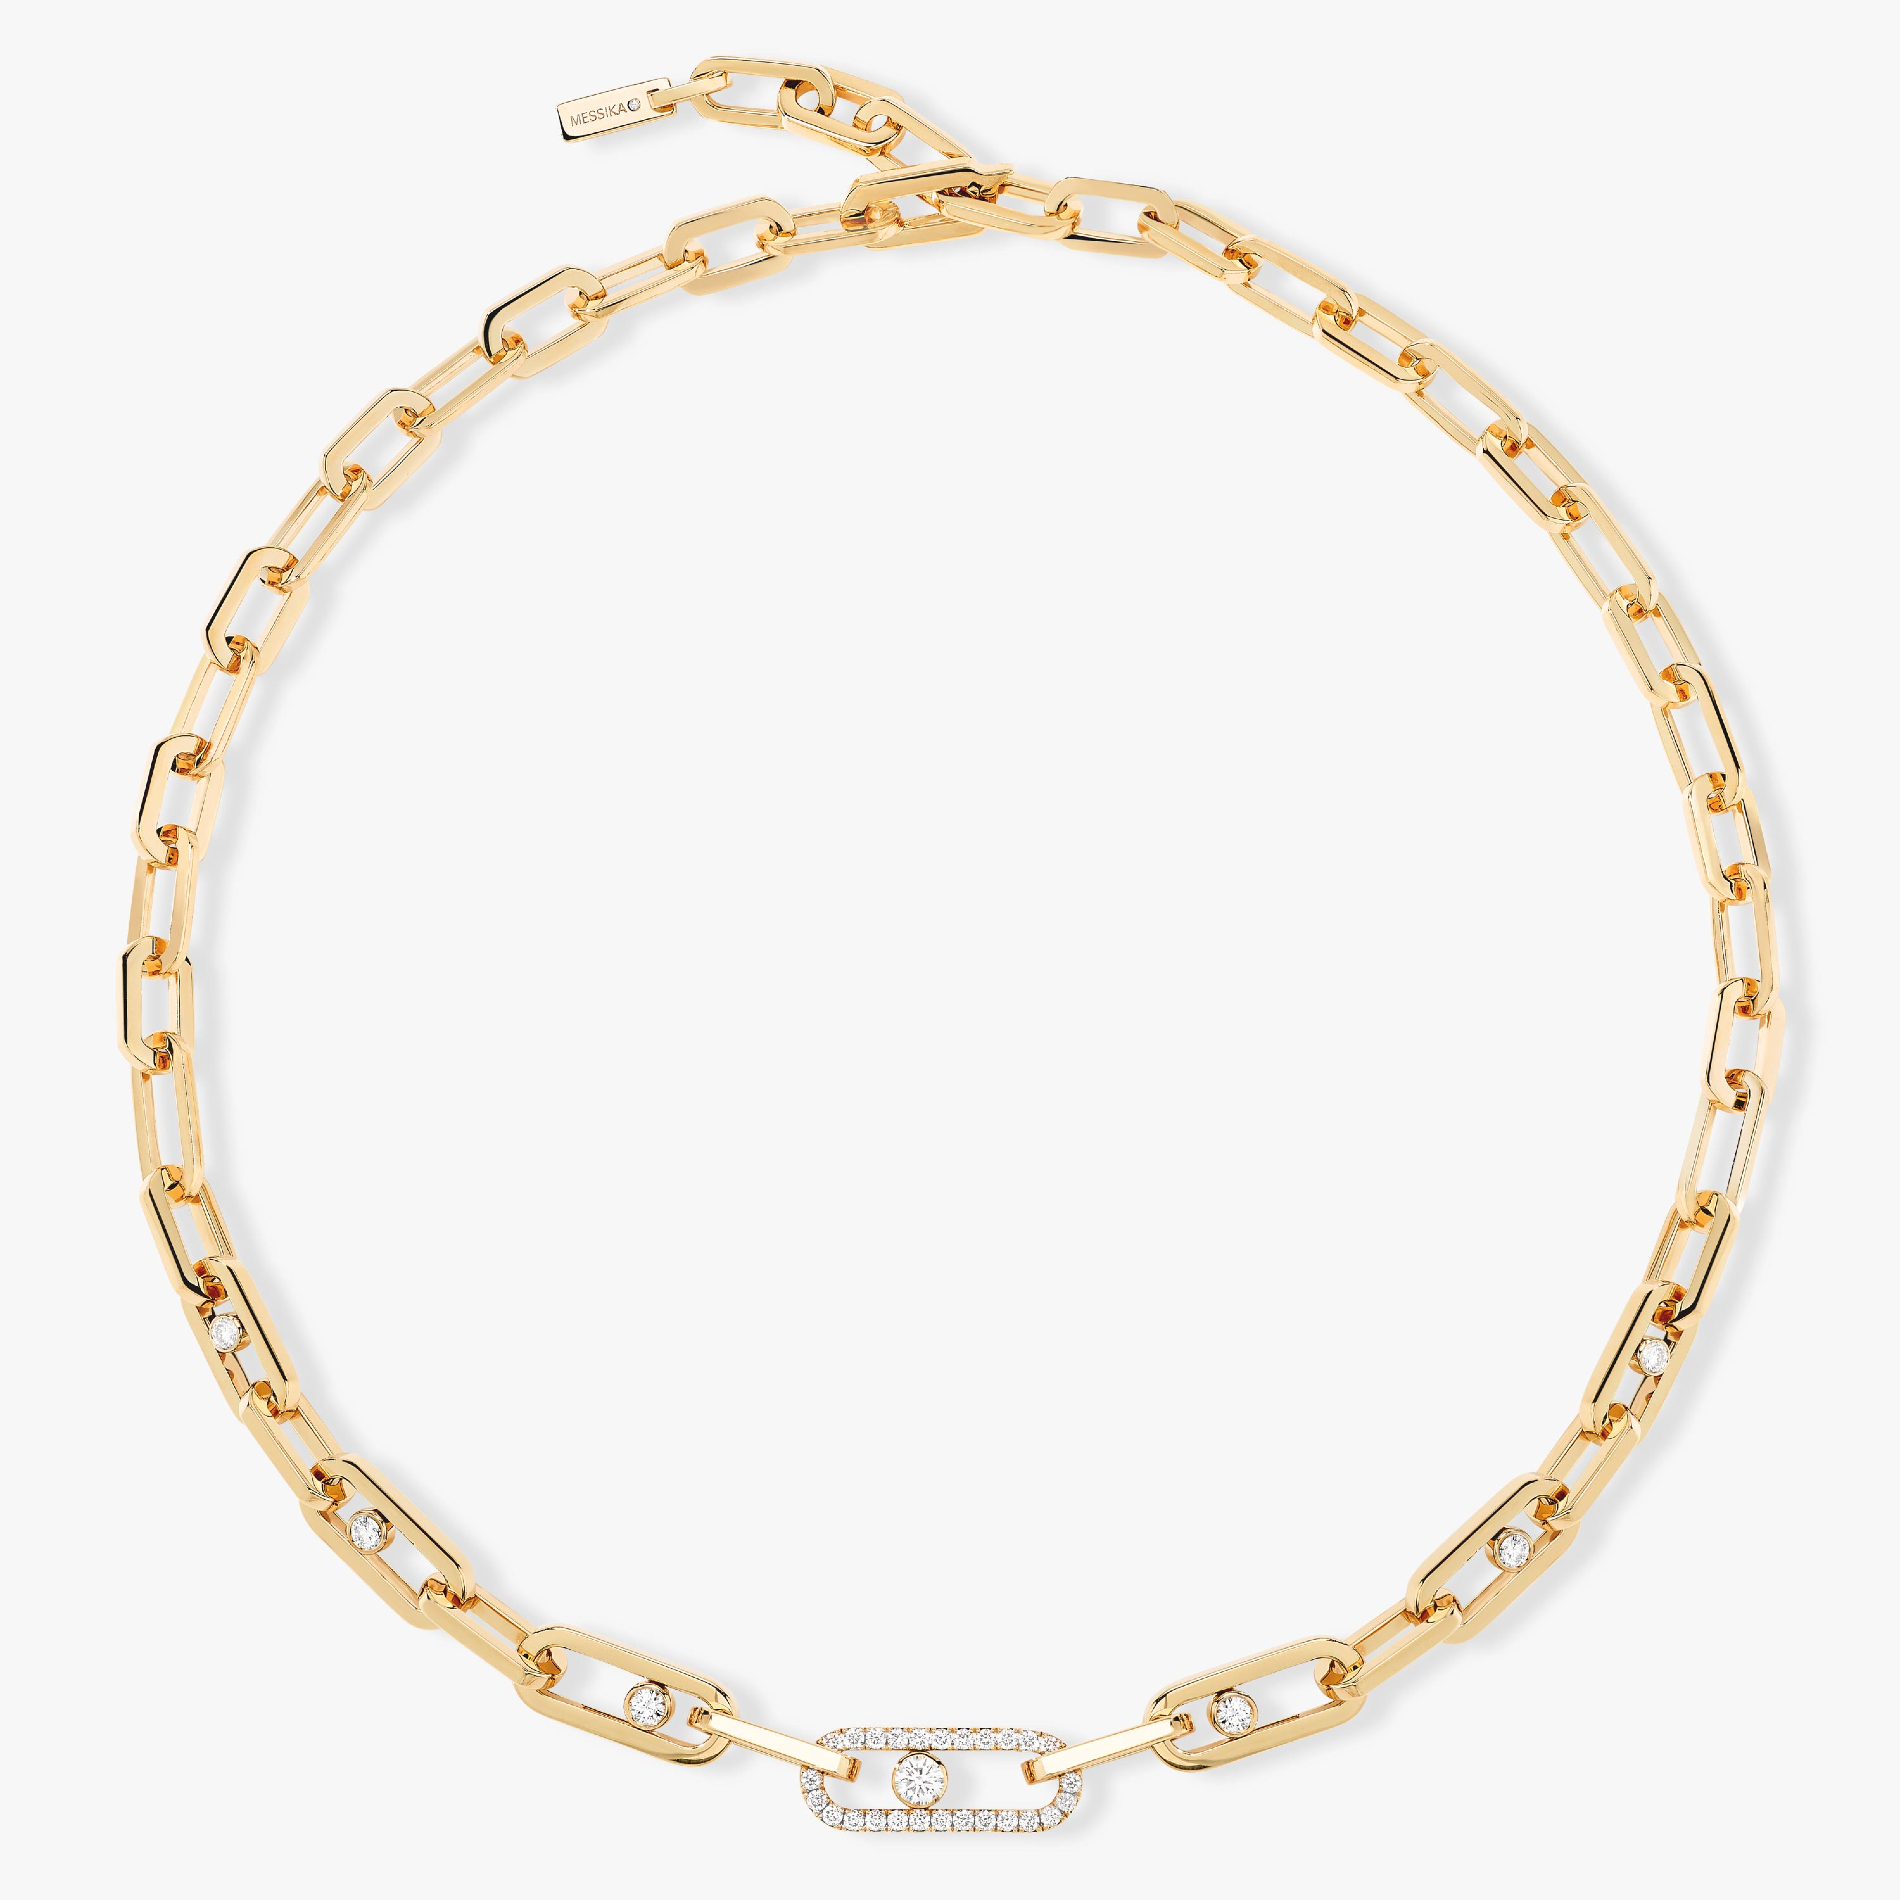 Collier Femme Or Jaune Diamant Move Link 12853-YG